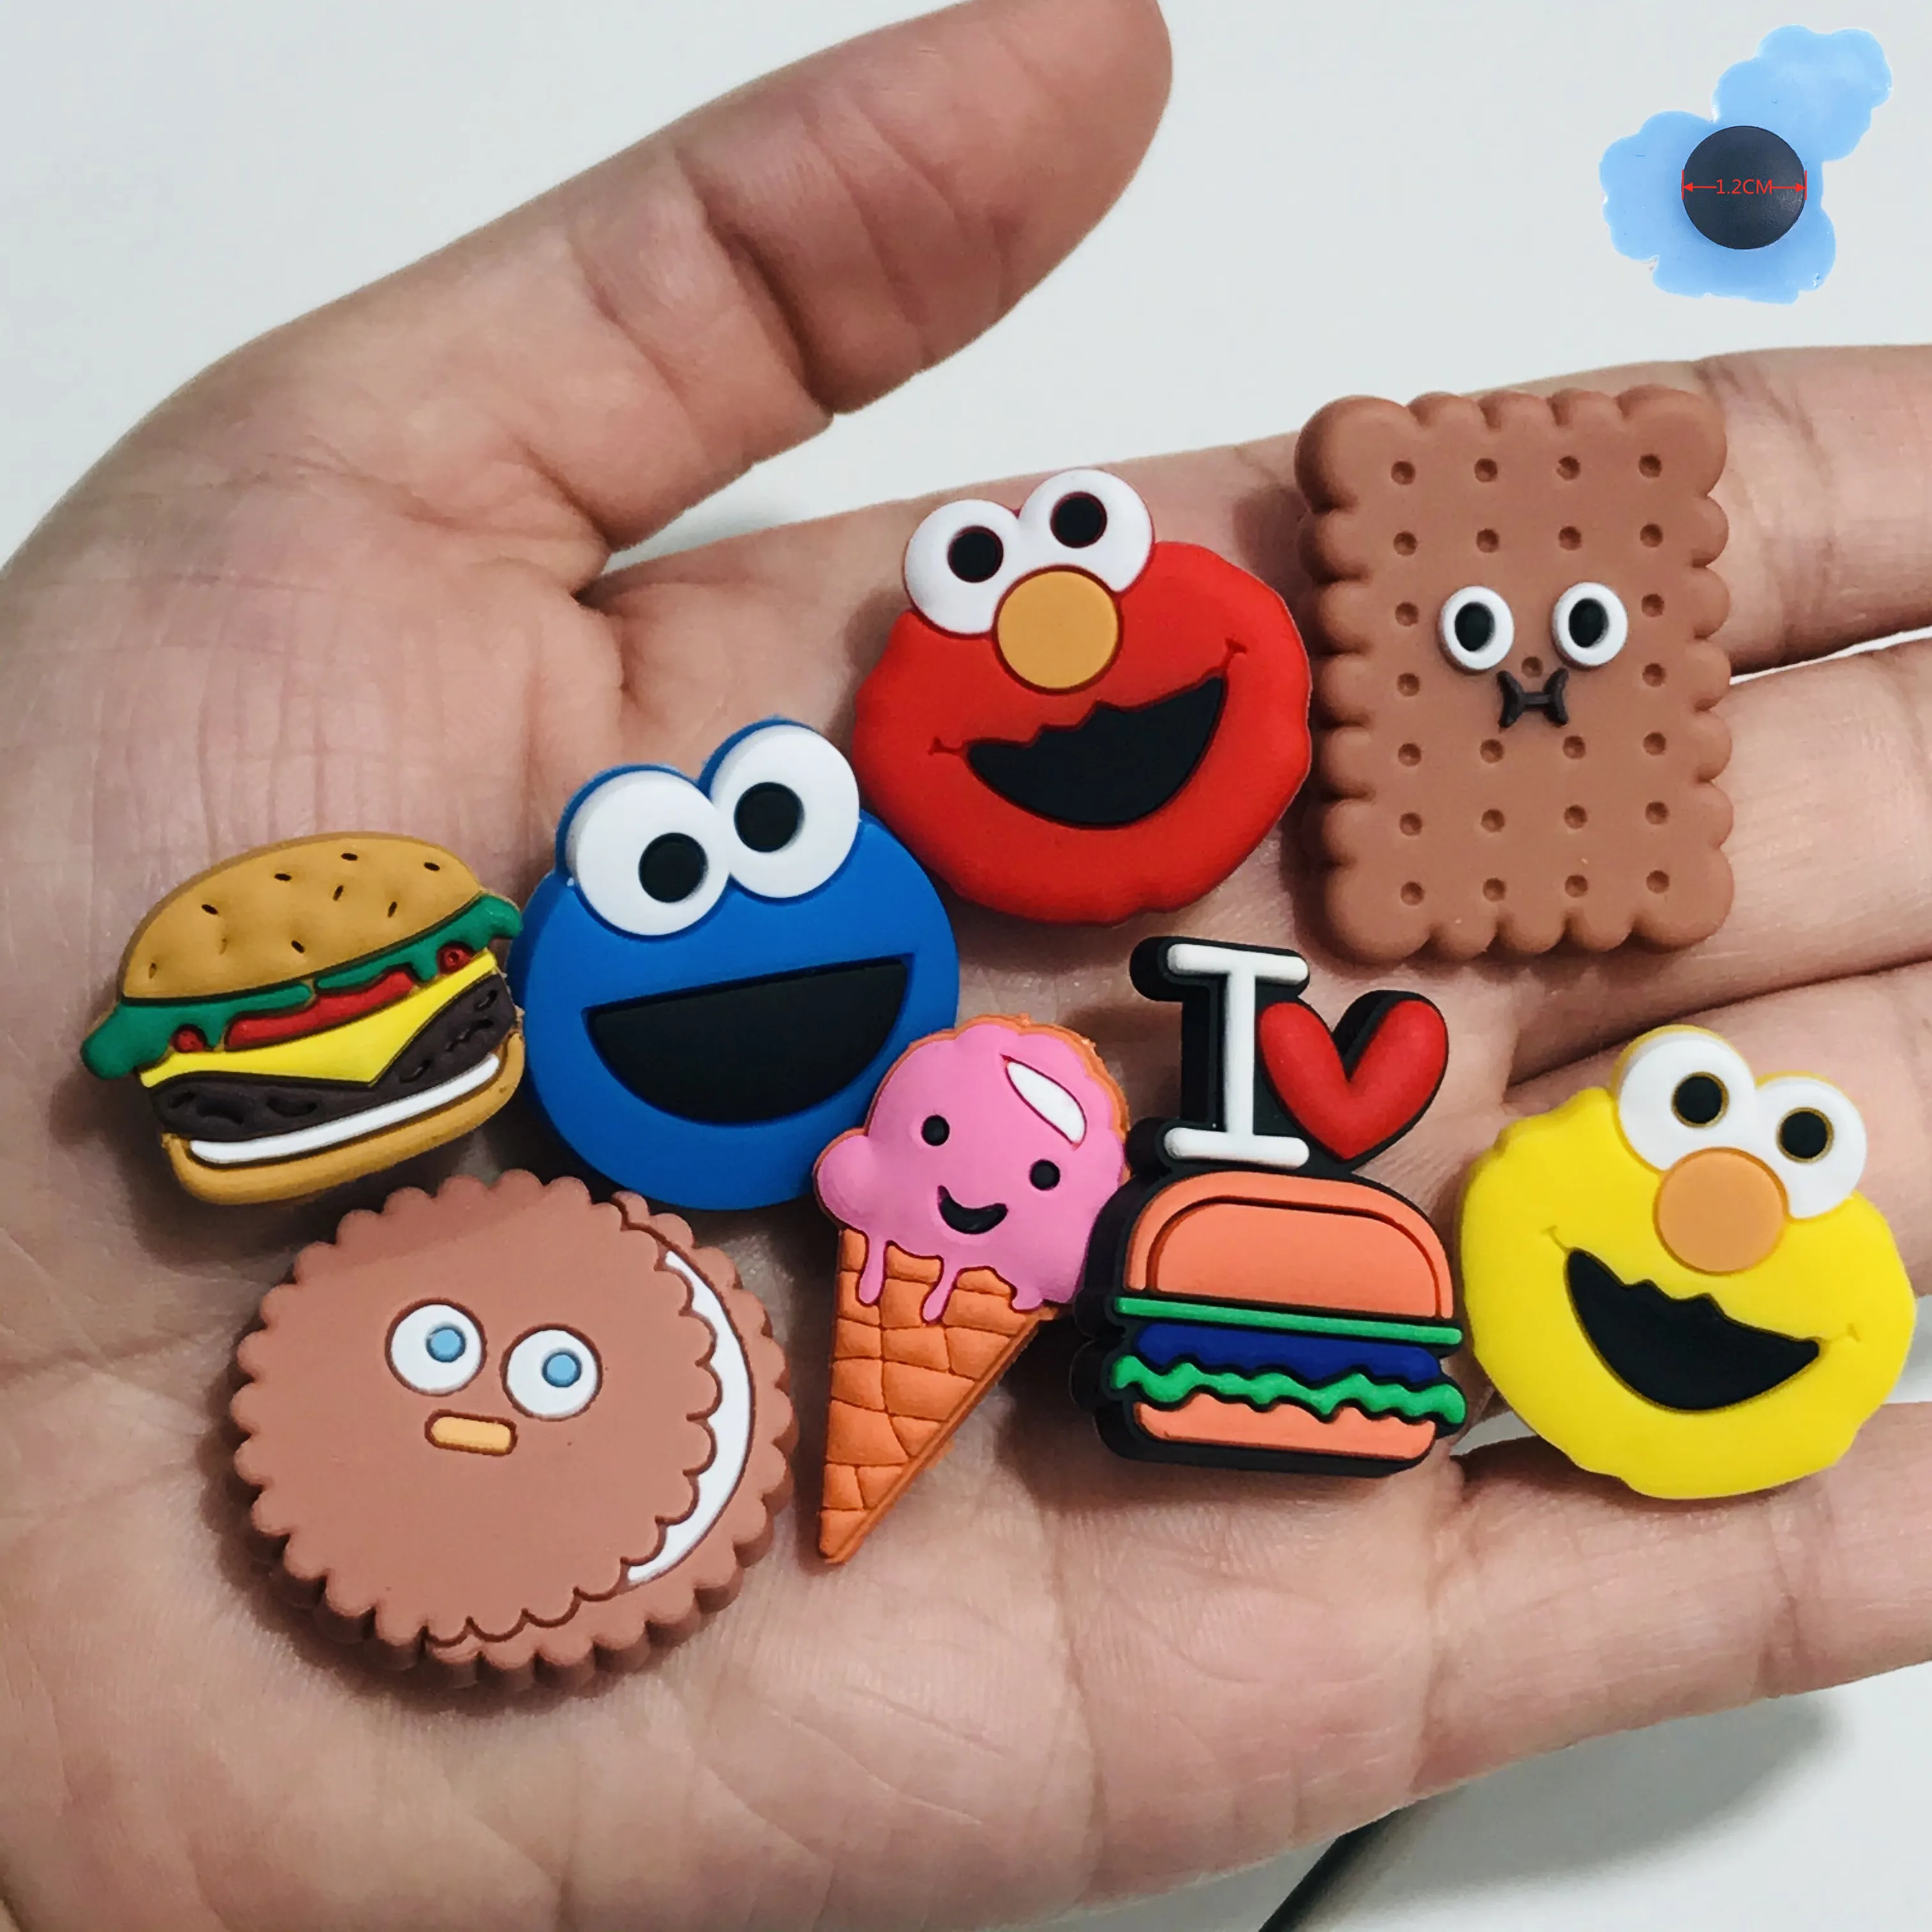 new jibz cartoon donut shoe charms diy dessert drink clogs shoe aceessories fit clog sandals decorate buckle kid girl gifts shoe decorations aliexpress